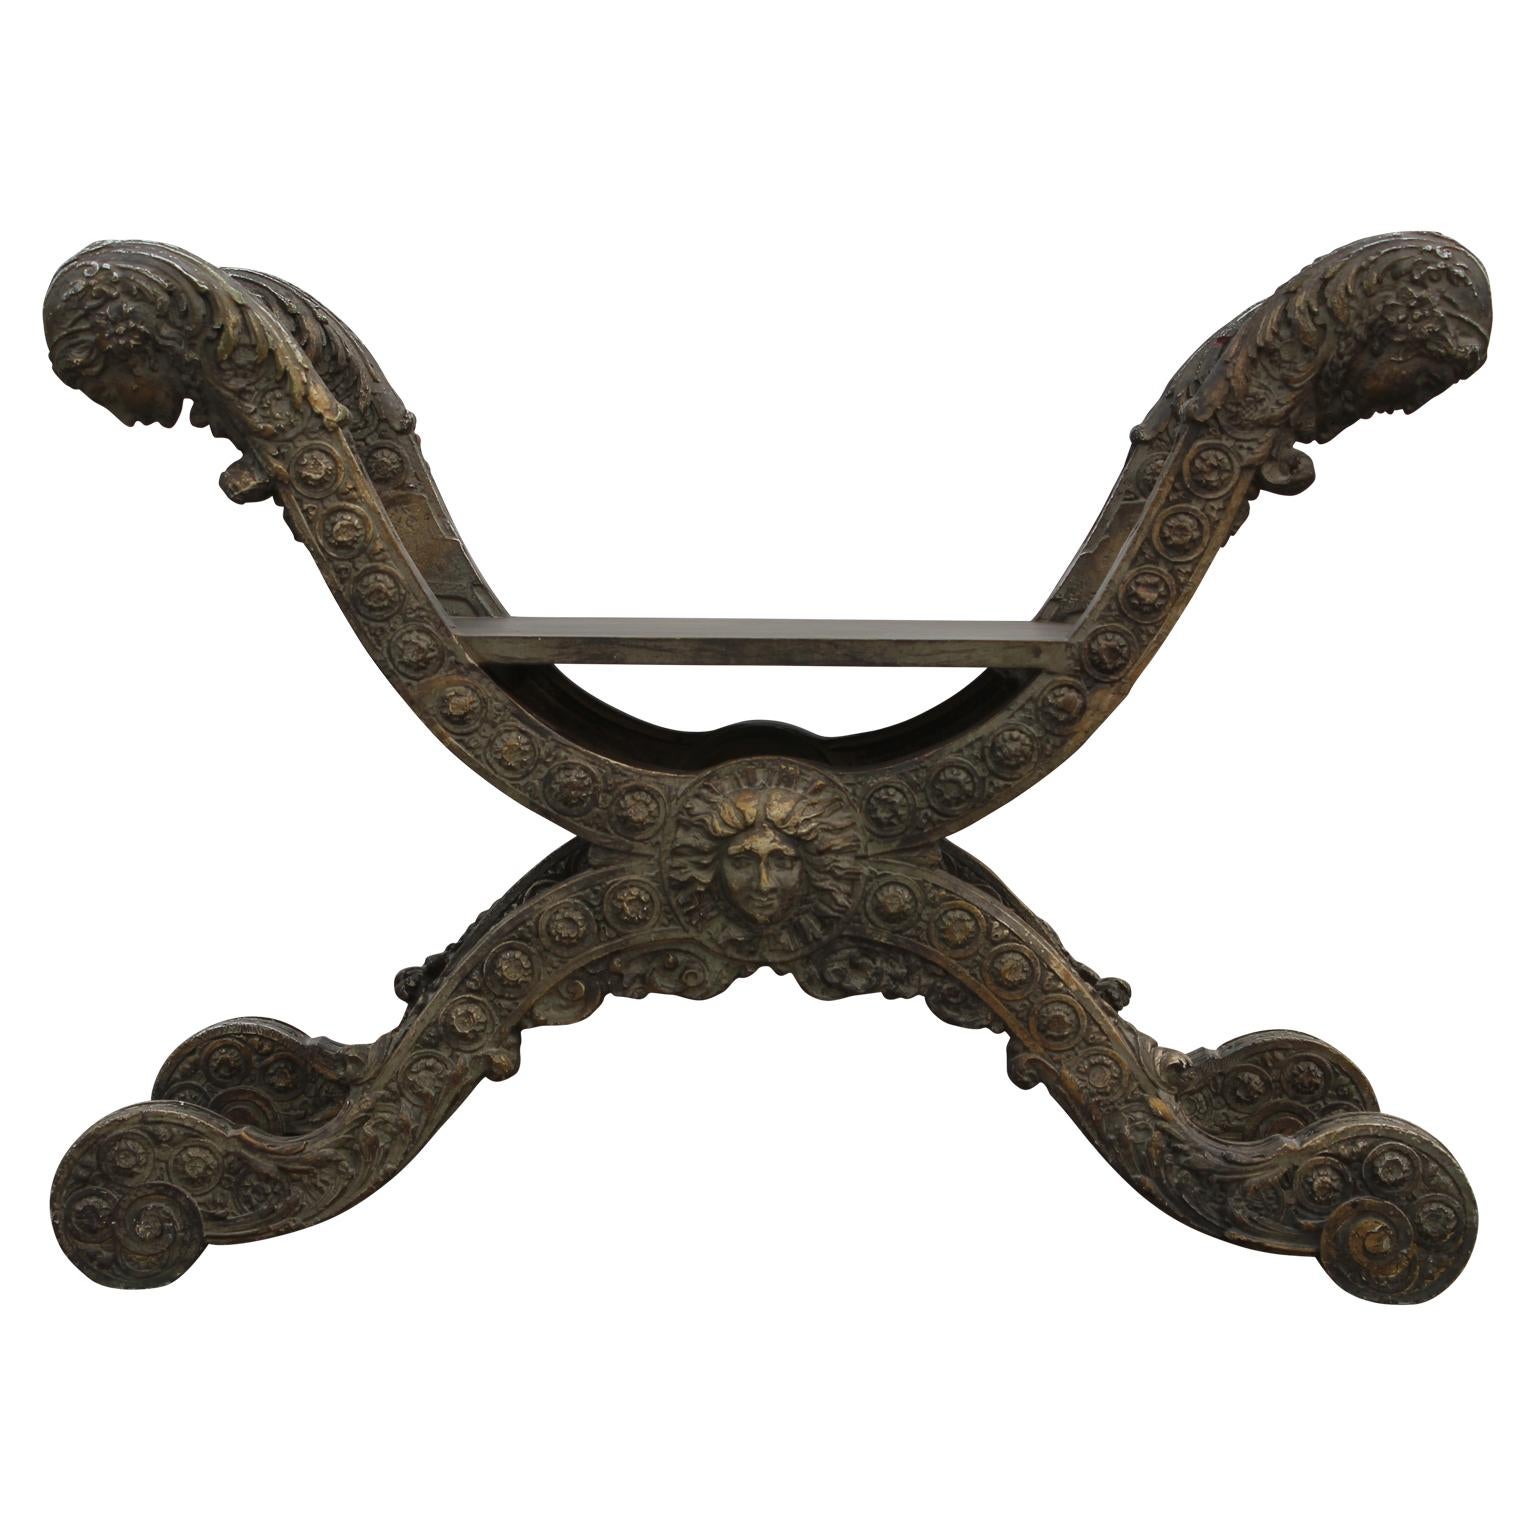 Stunning French renaissance style curule stool or bench made from intricately carved resin and wood.